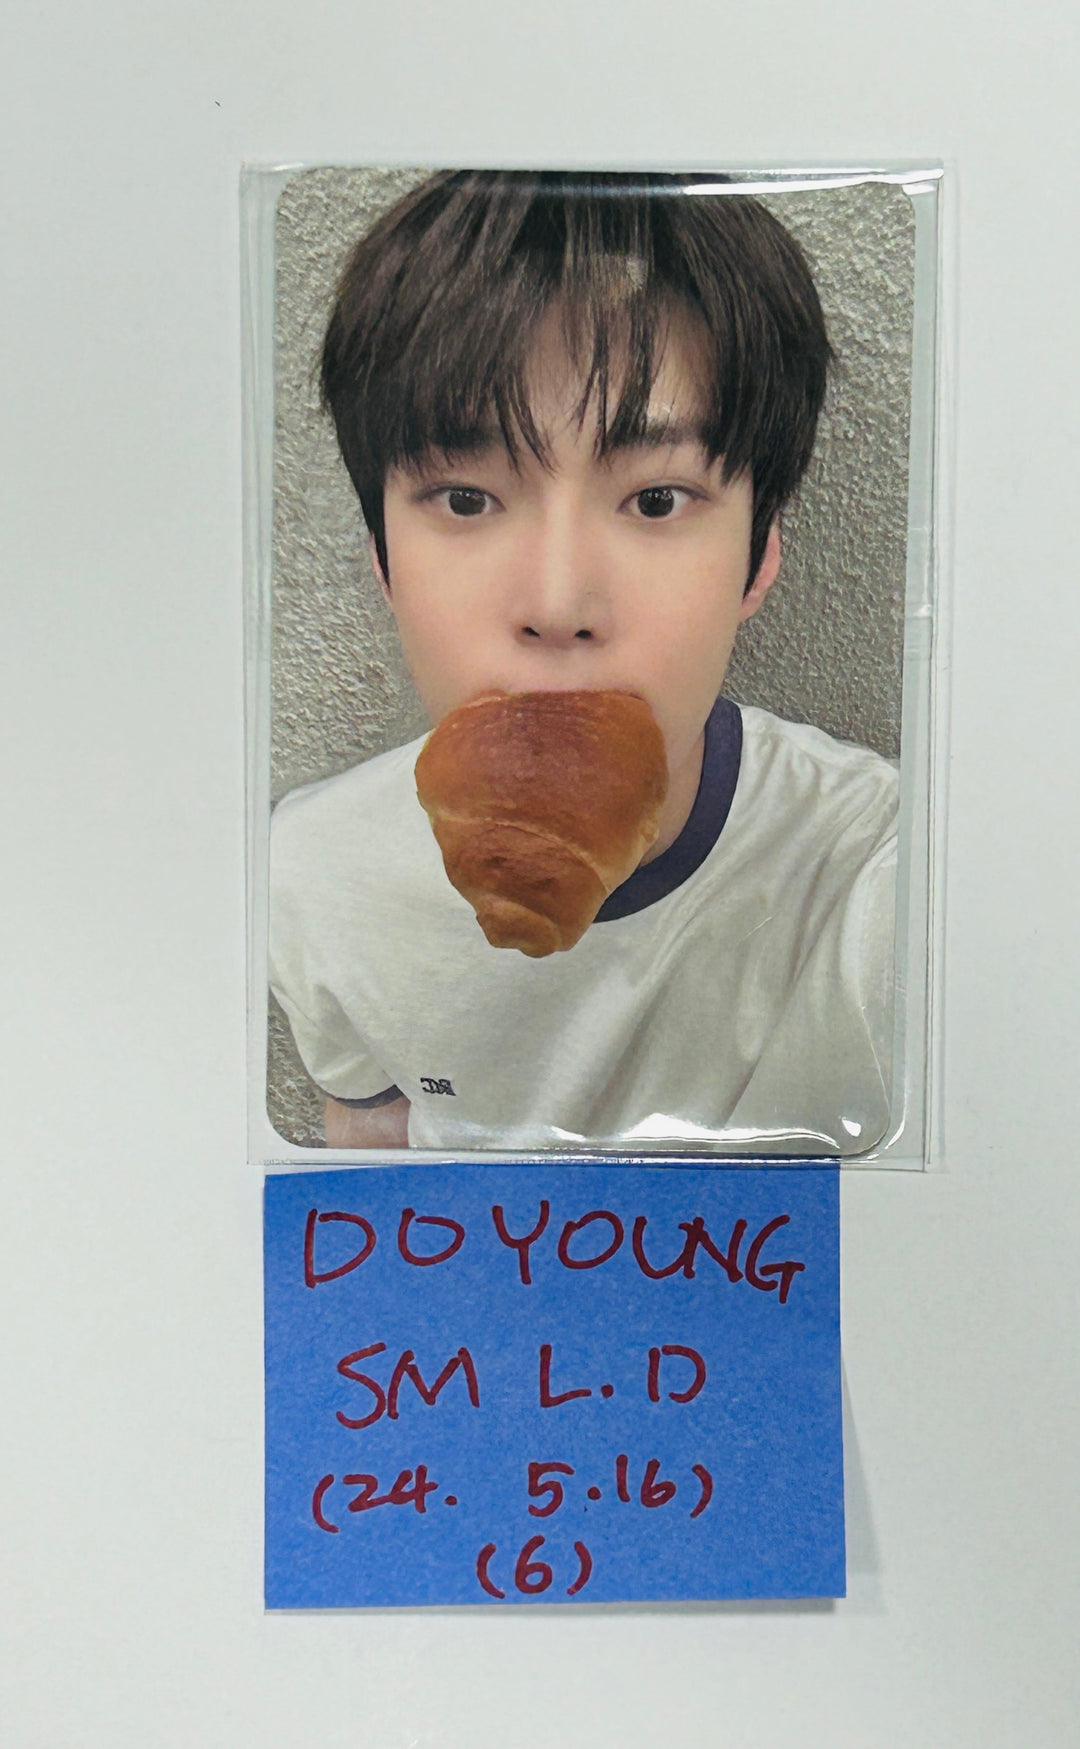 DOYOUNG (Of NCT) "YOUTH" - SM Town Lucky Draw Event Photocard [24.5.16]